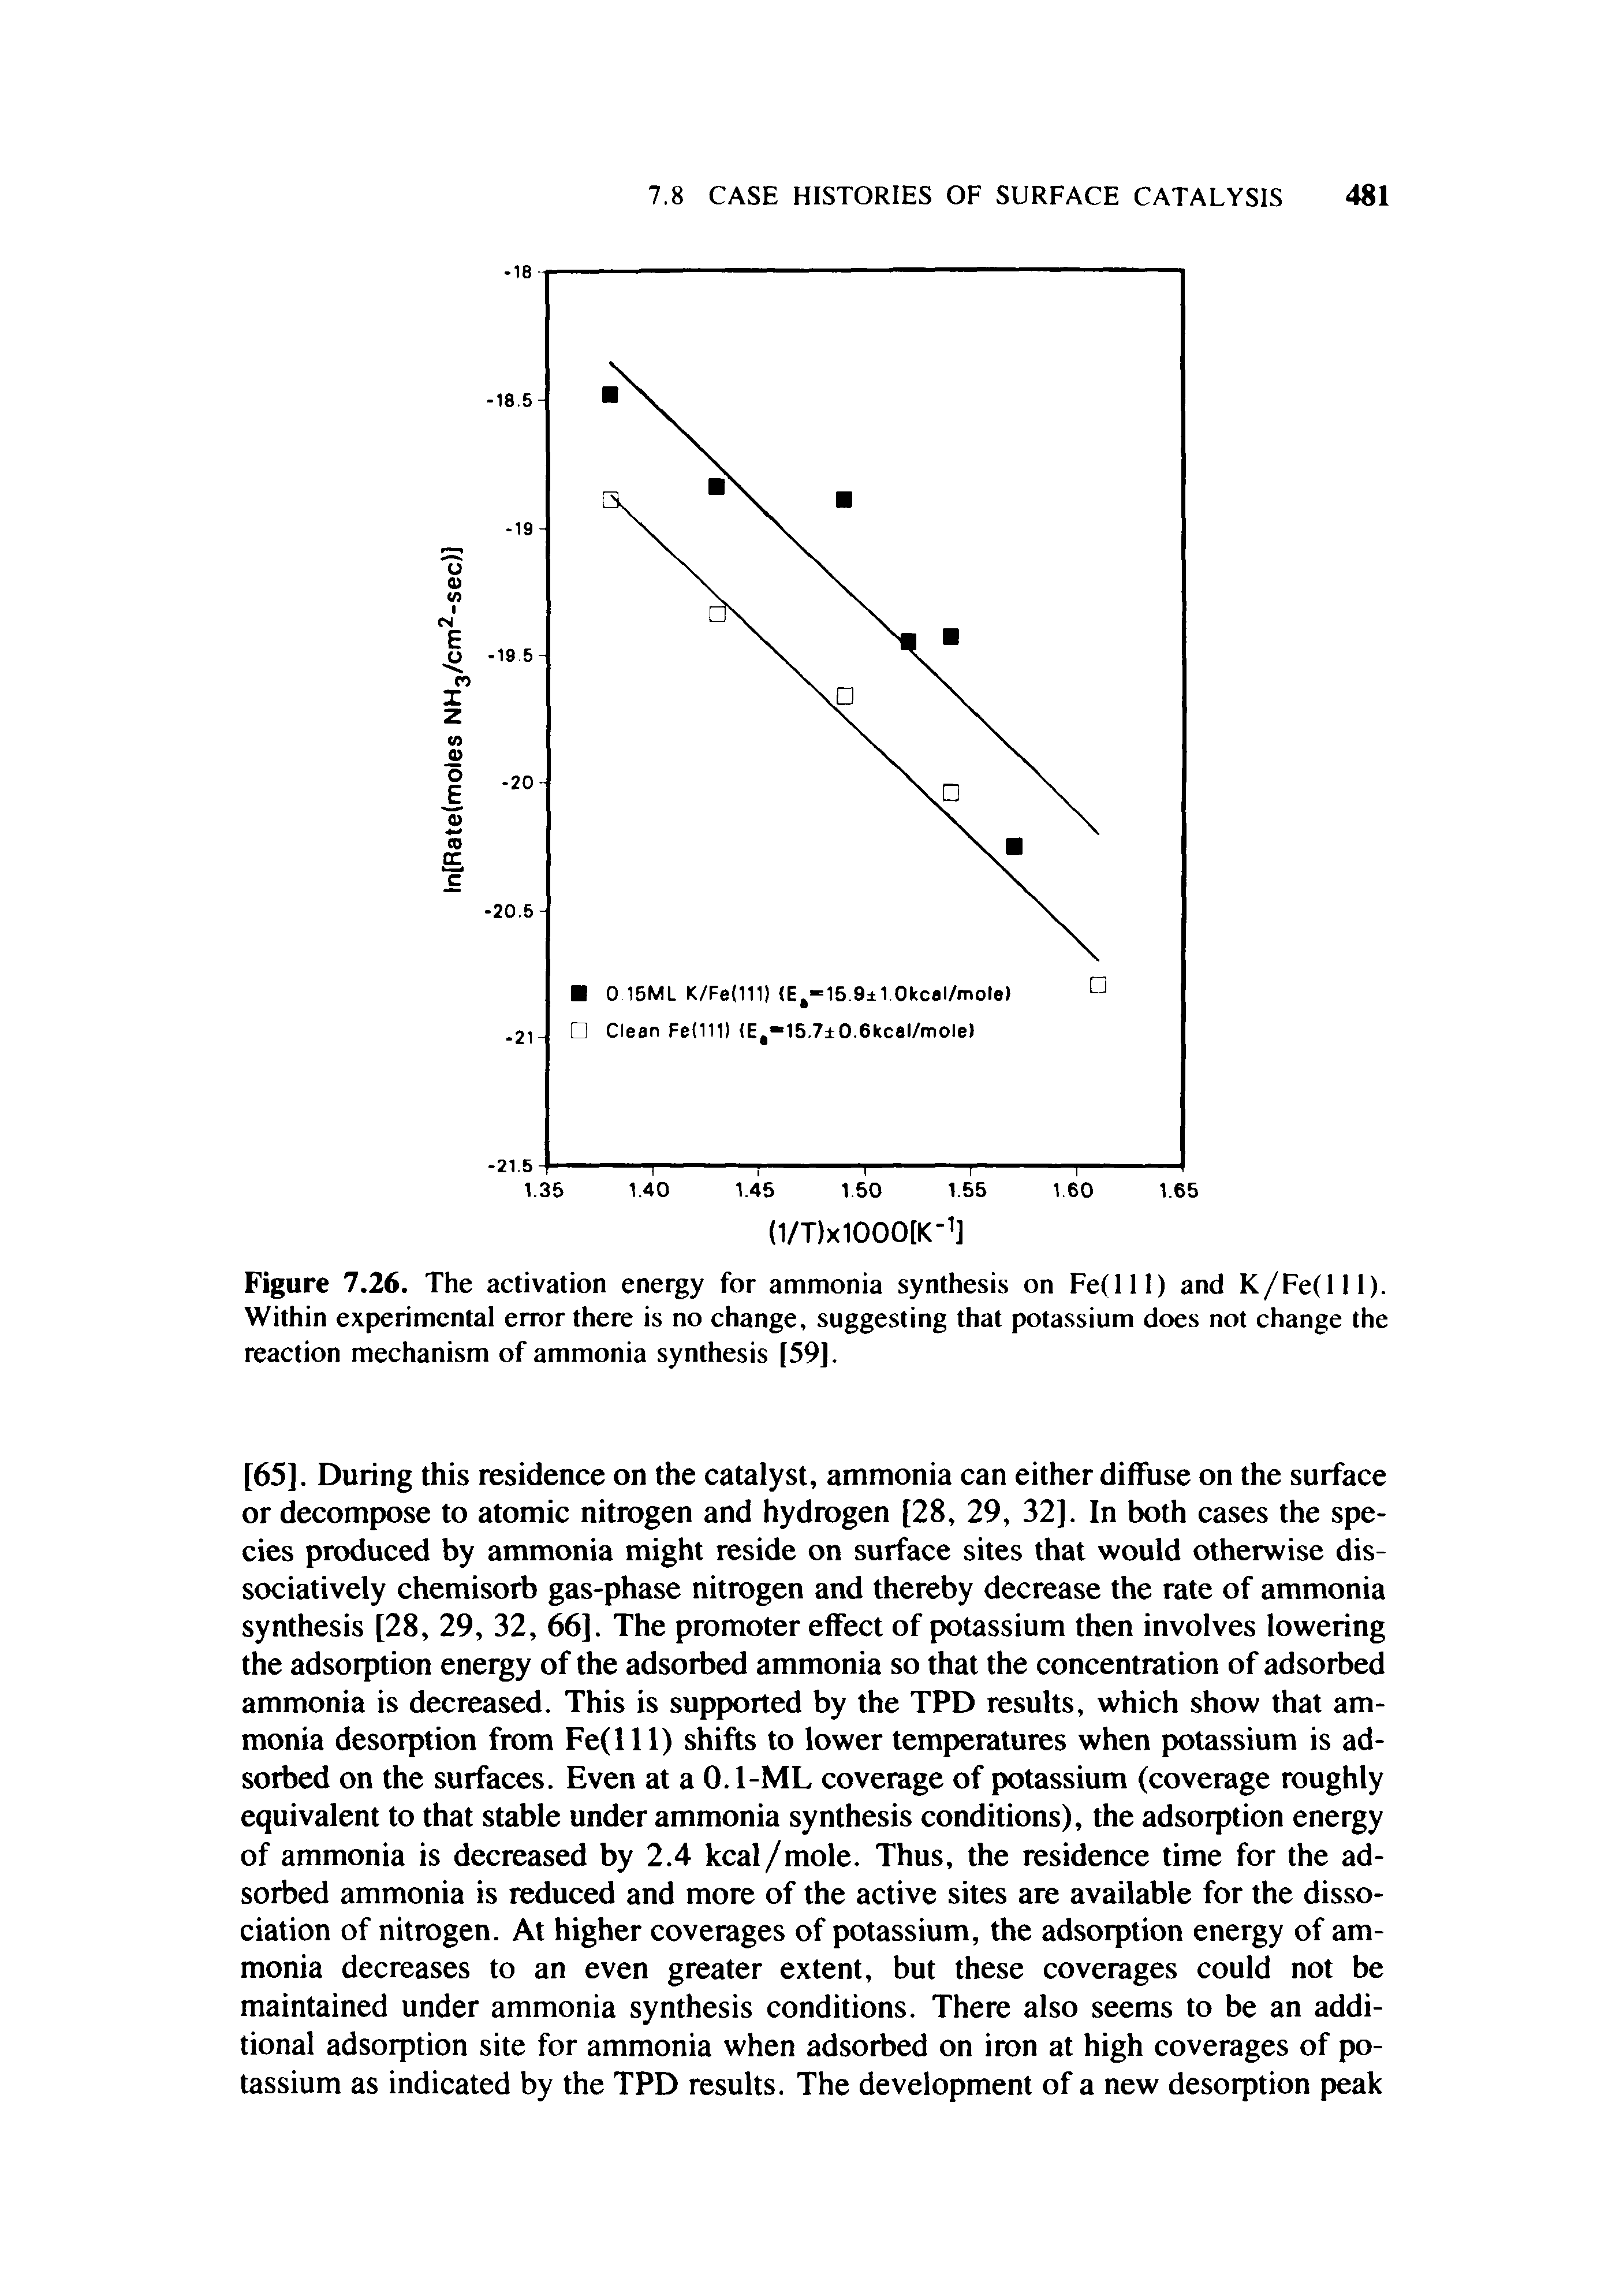 Figure 7.26. The activation energy for ammonia synthesis on Fe(lll) and K/Fe(lll). Within experimental error there is no change, suggesting that potassium does not change the reaction mechanism of ammonia synthesis [59].